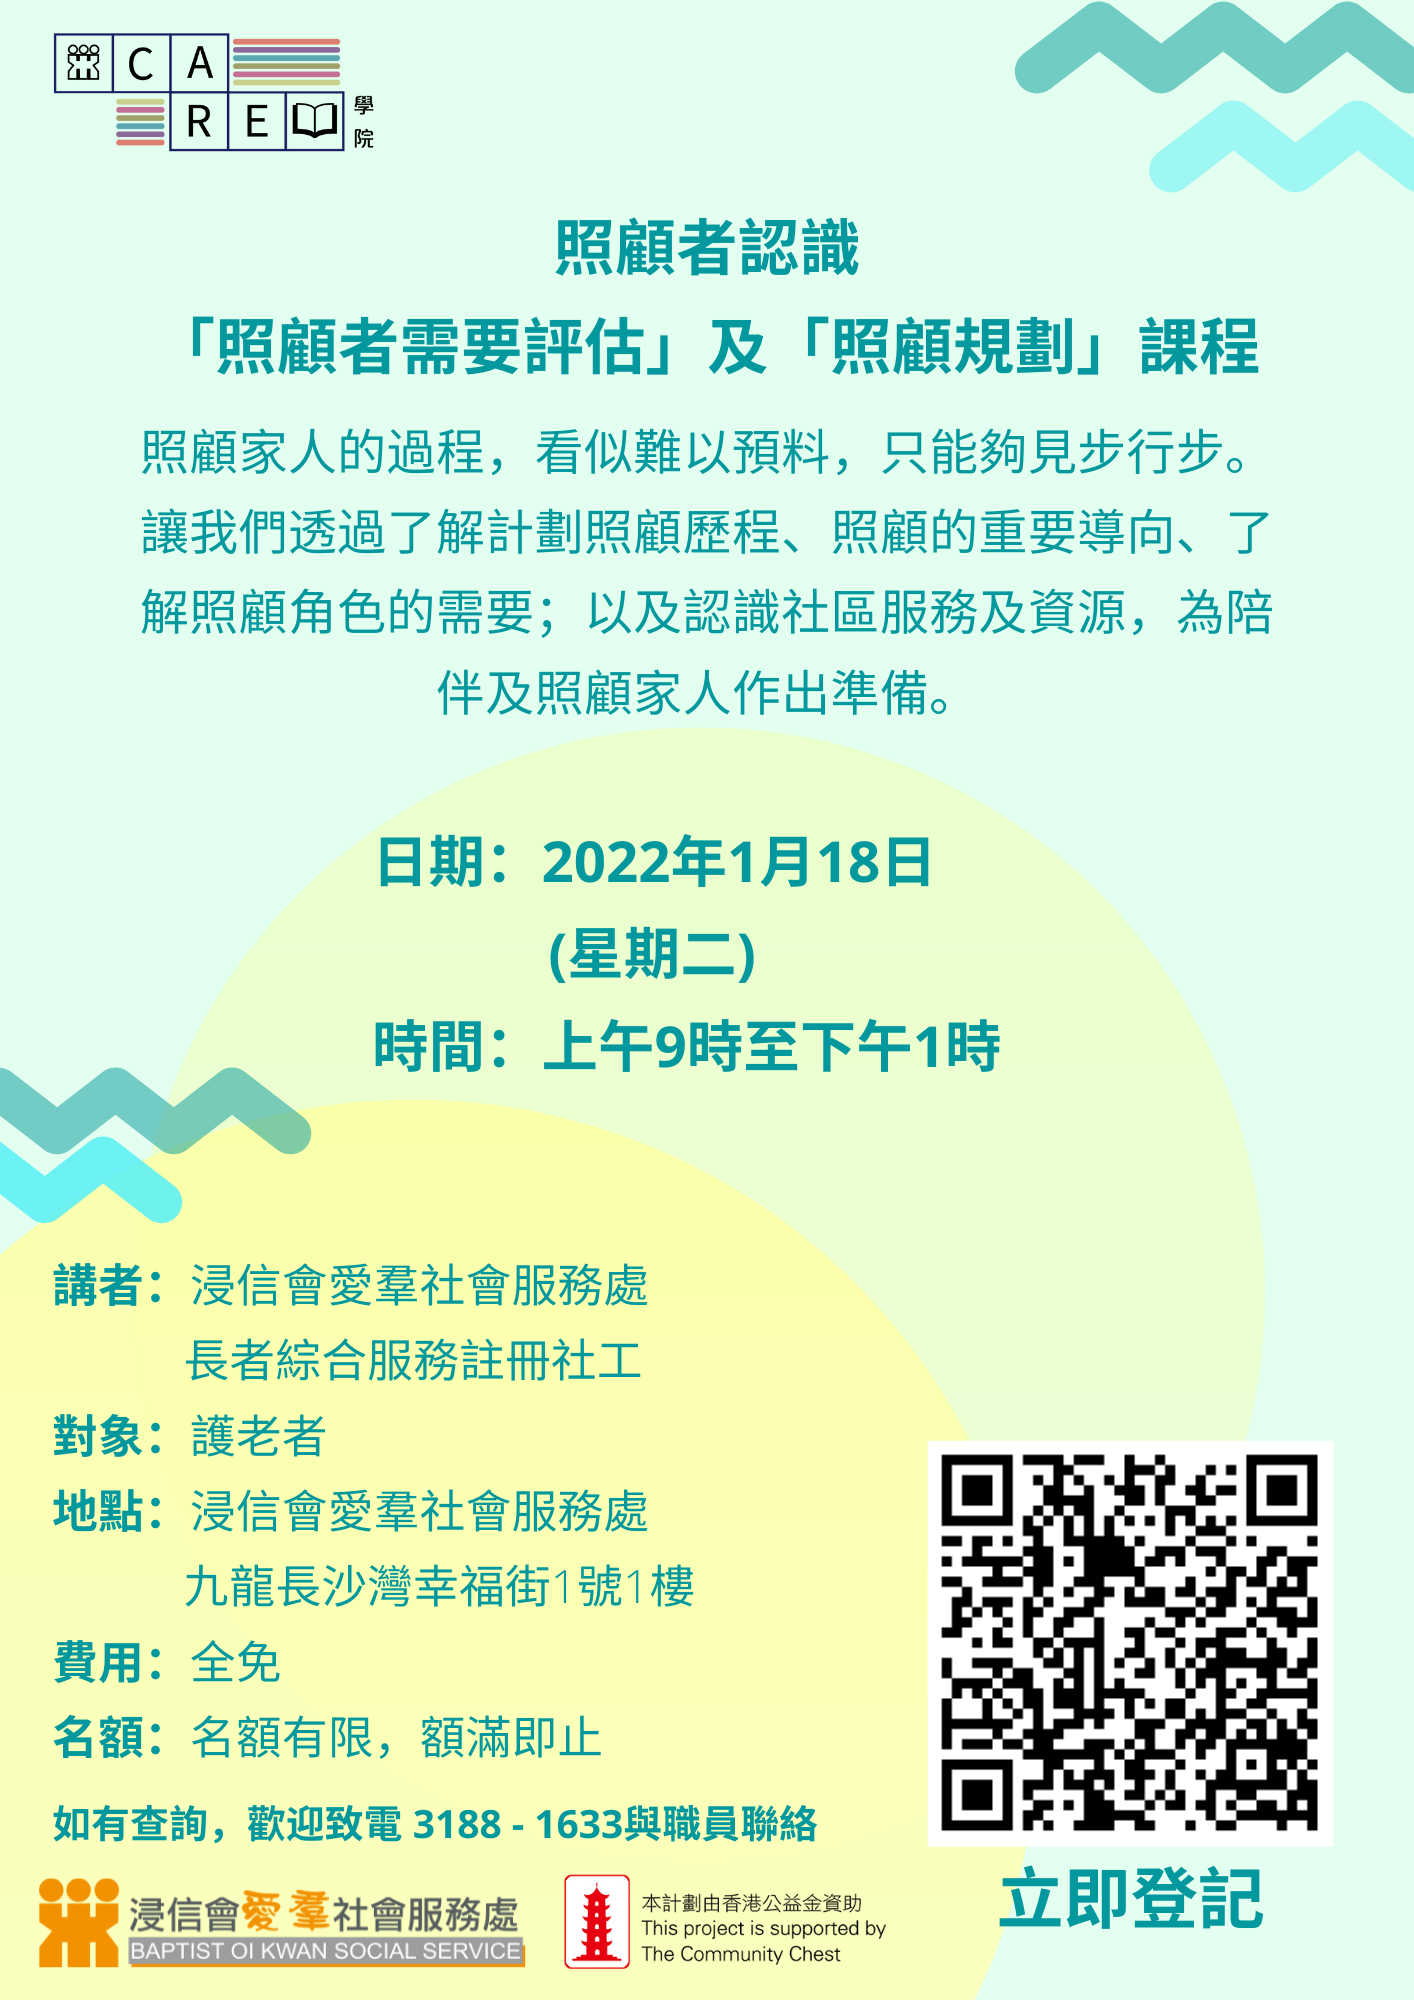 http://carecollege.bokss.org.hk/upload/course/35/self/61b2cd8d760f4.png